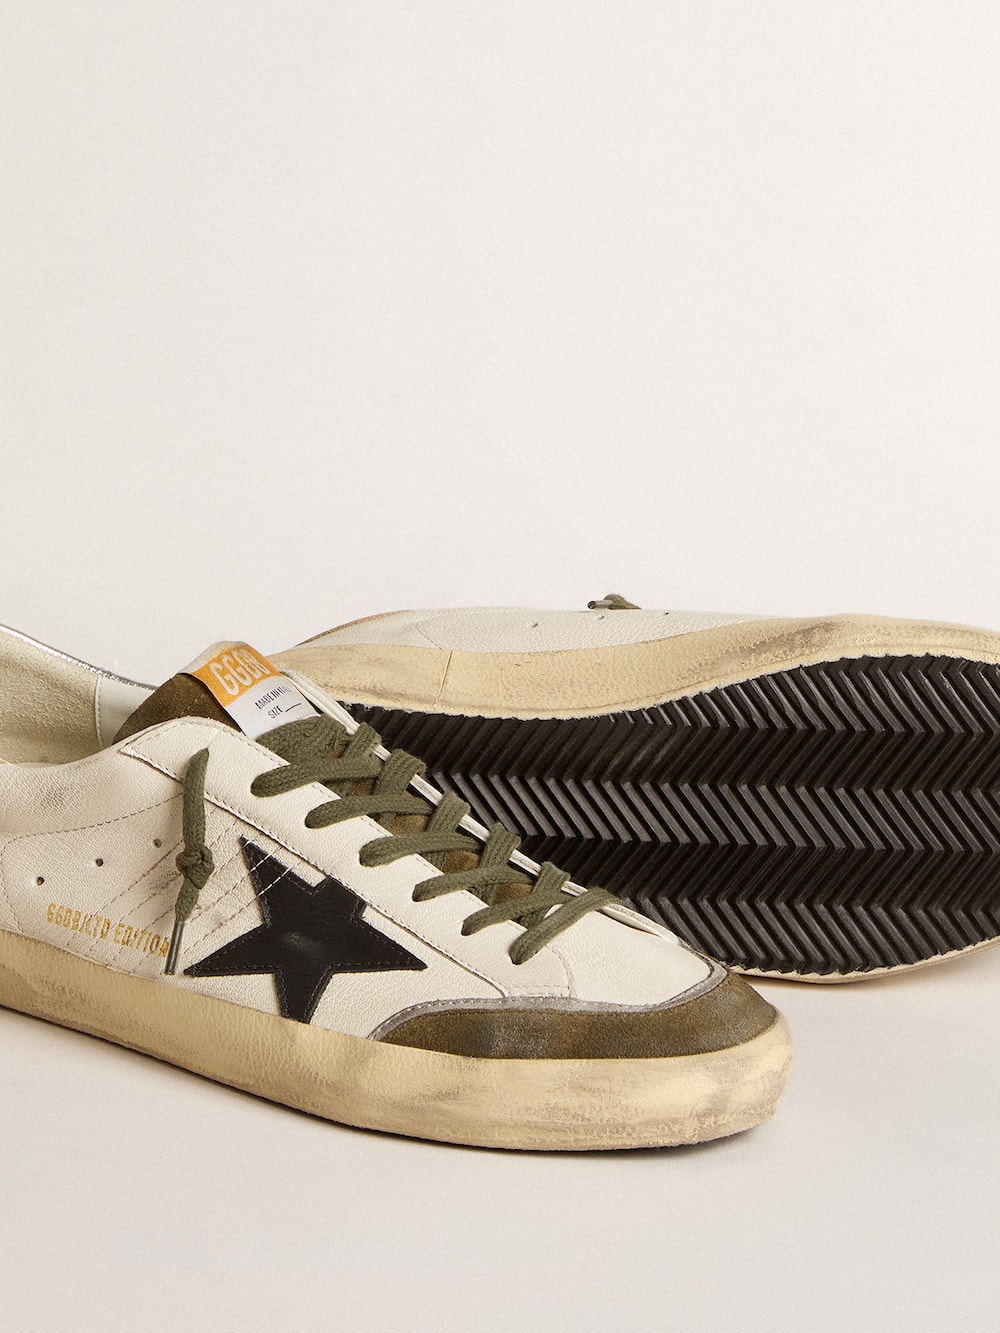 Golden Goose - Super-Star LTD in nappa leather with black leather star and silver heel tab in 